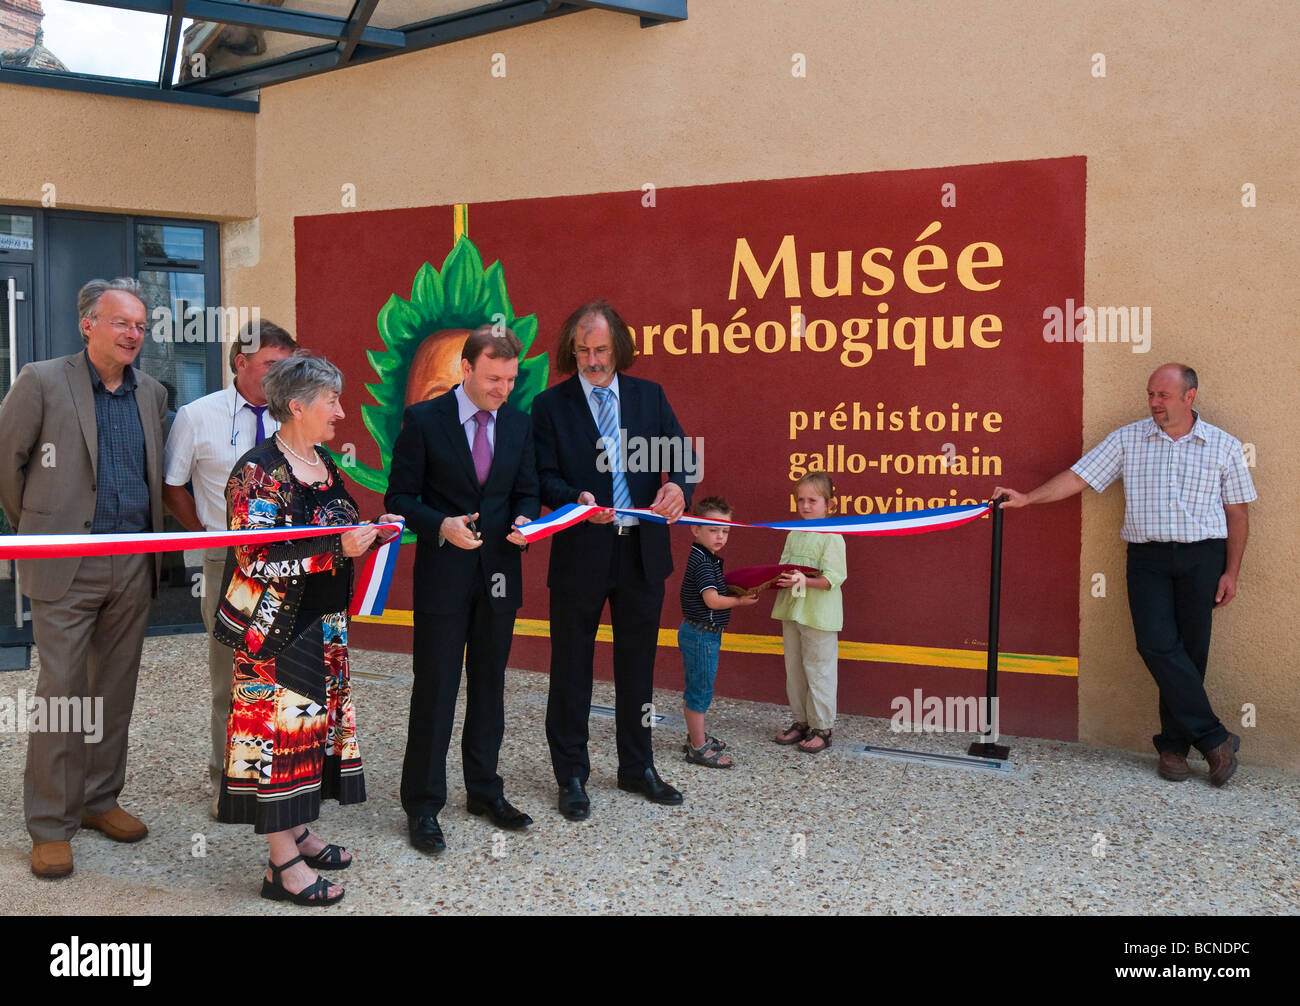 Cutting the ribbon at official opening of newly converted Musée Archéologique / Archeology Museum - Martizay, Indre, France. Stock Photo